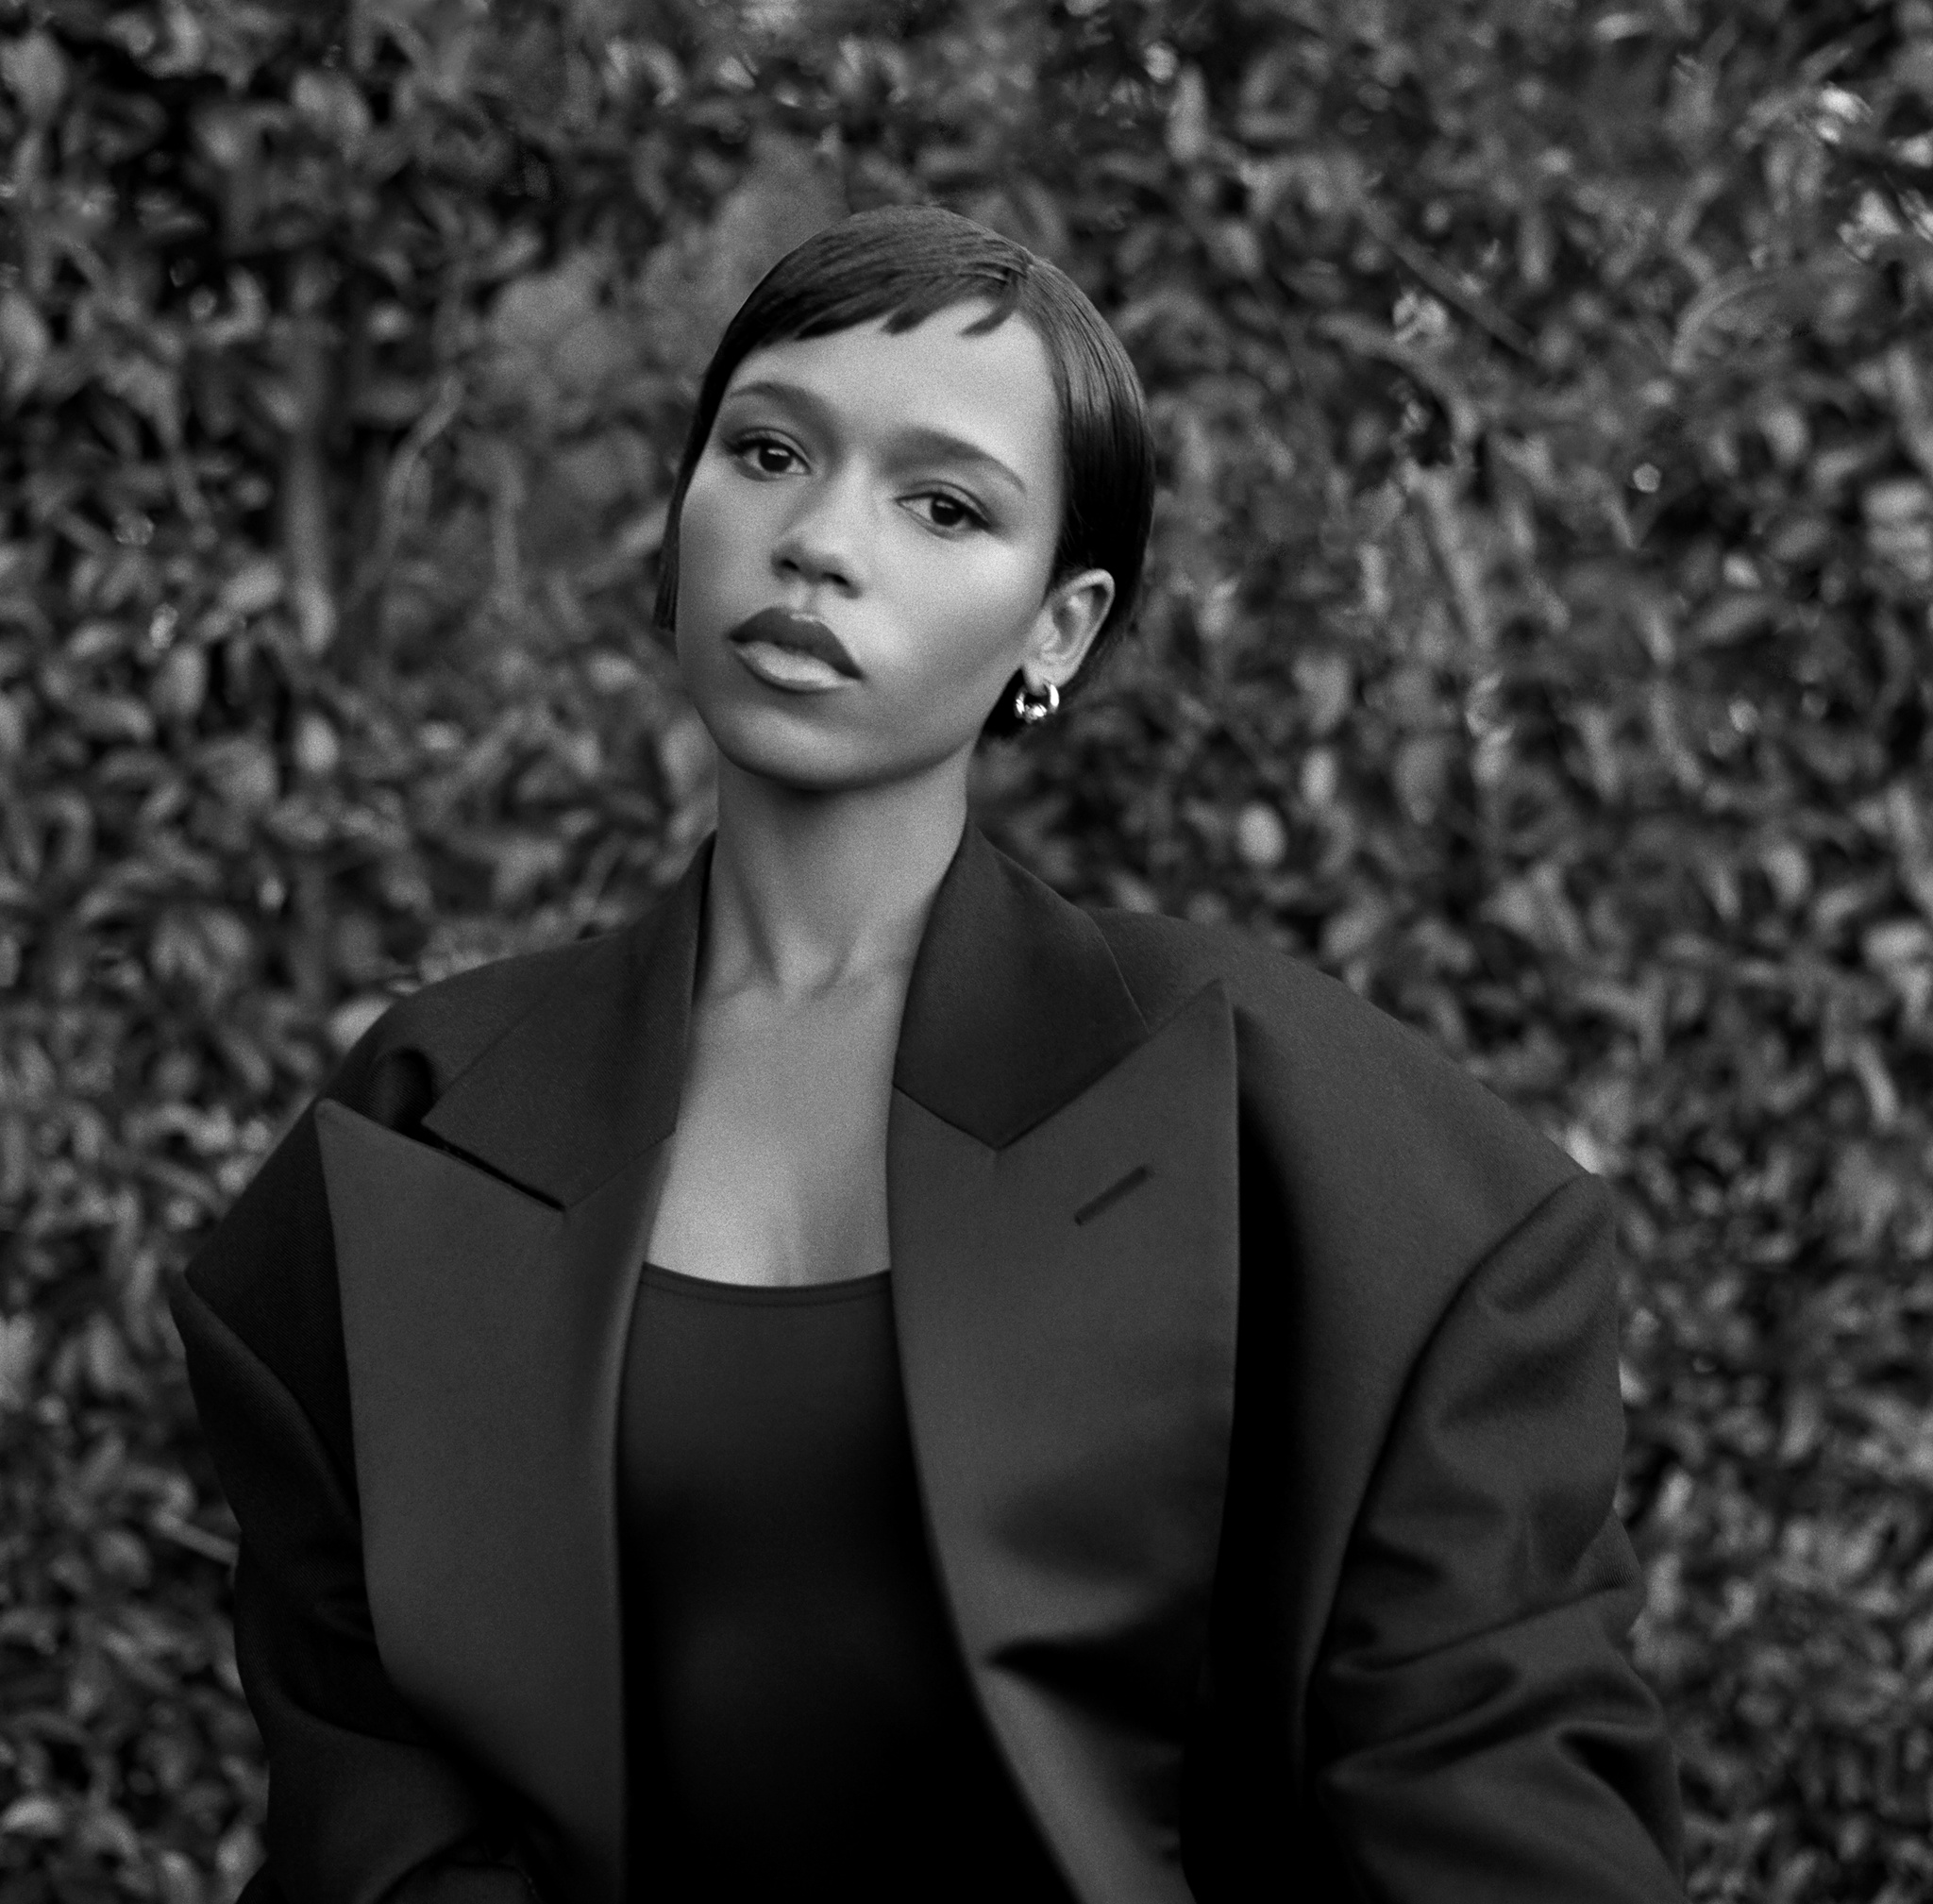 A black and white portrait of actor Taylor Russell. A Black woman, she is seen from the waist up, facing us, against a background of ivy. Taylor has short hair, with bangs swooped to her right across her forehead. She wears a black shoulderless dress with a black dinner jacket with wide shoulders. 